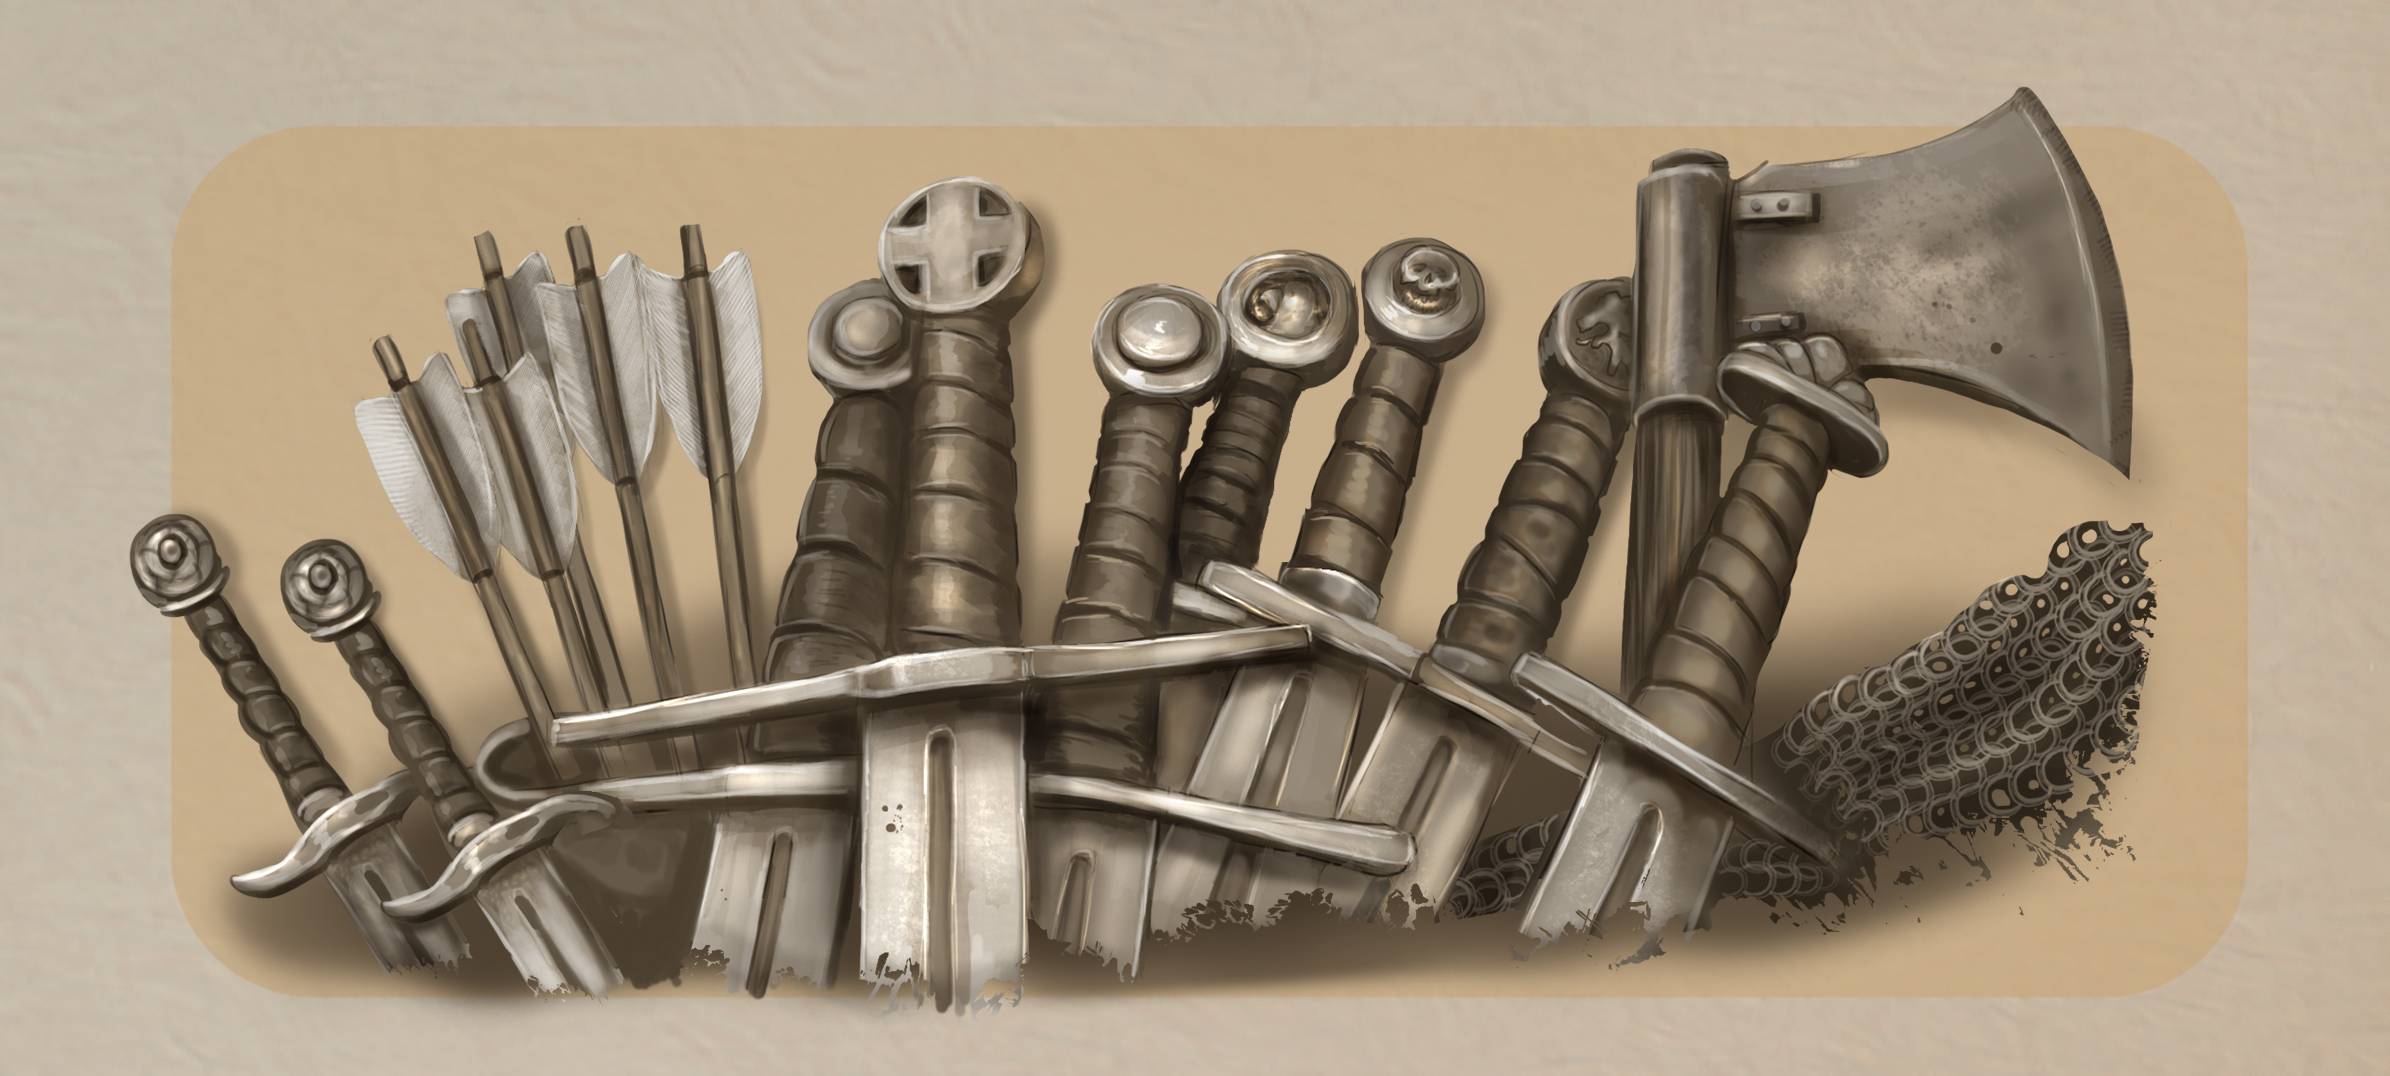 weapon spot art for rpg tabletop game tyrant's conquest, by The Noble Artist